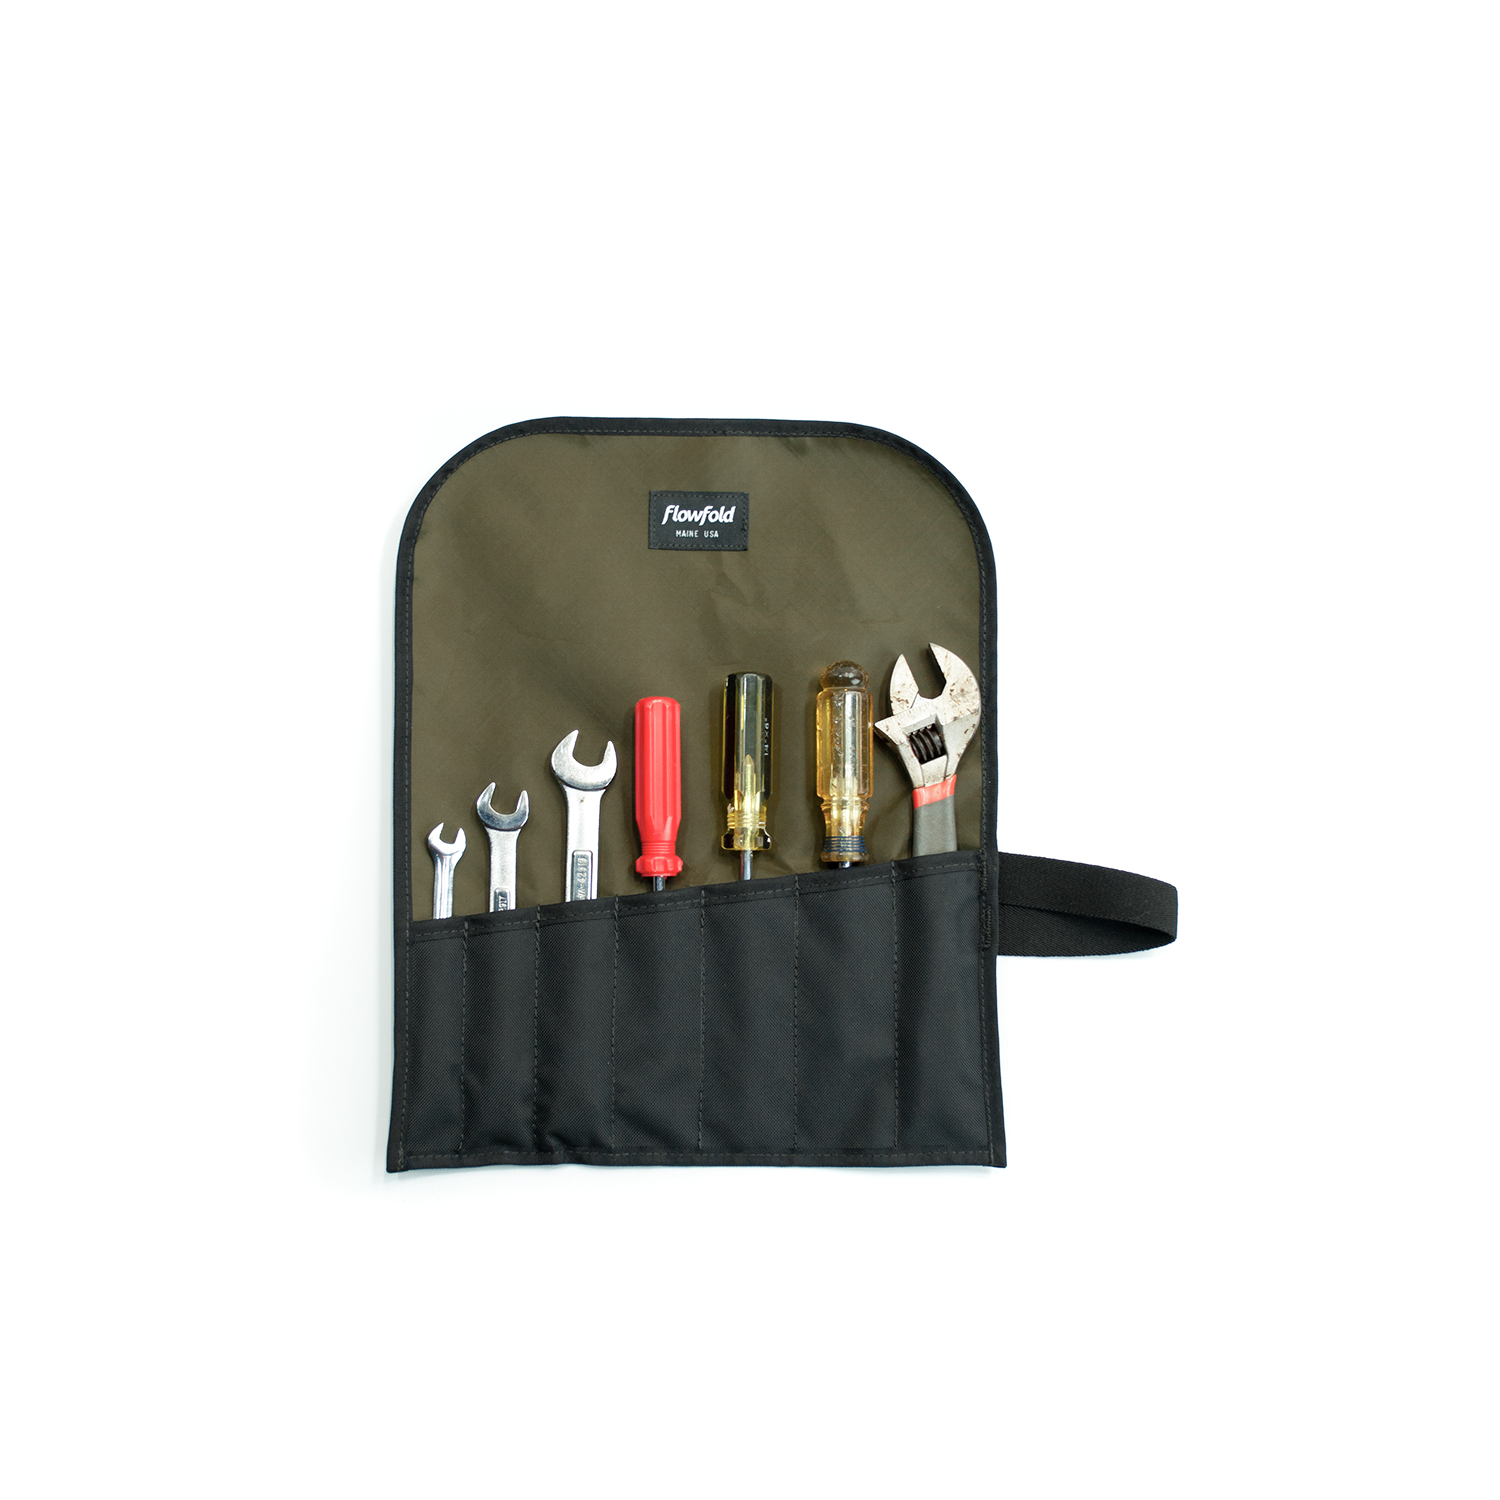 Flowfold Small Comrade Tool Roll 100% Recycled fabric tool roll, water repellent and made in USA